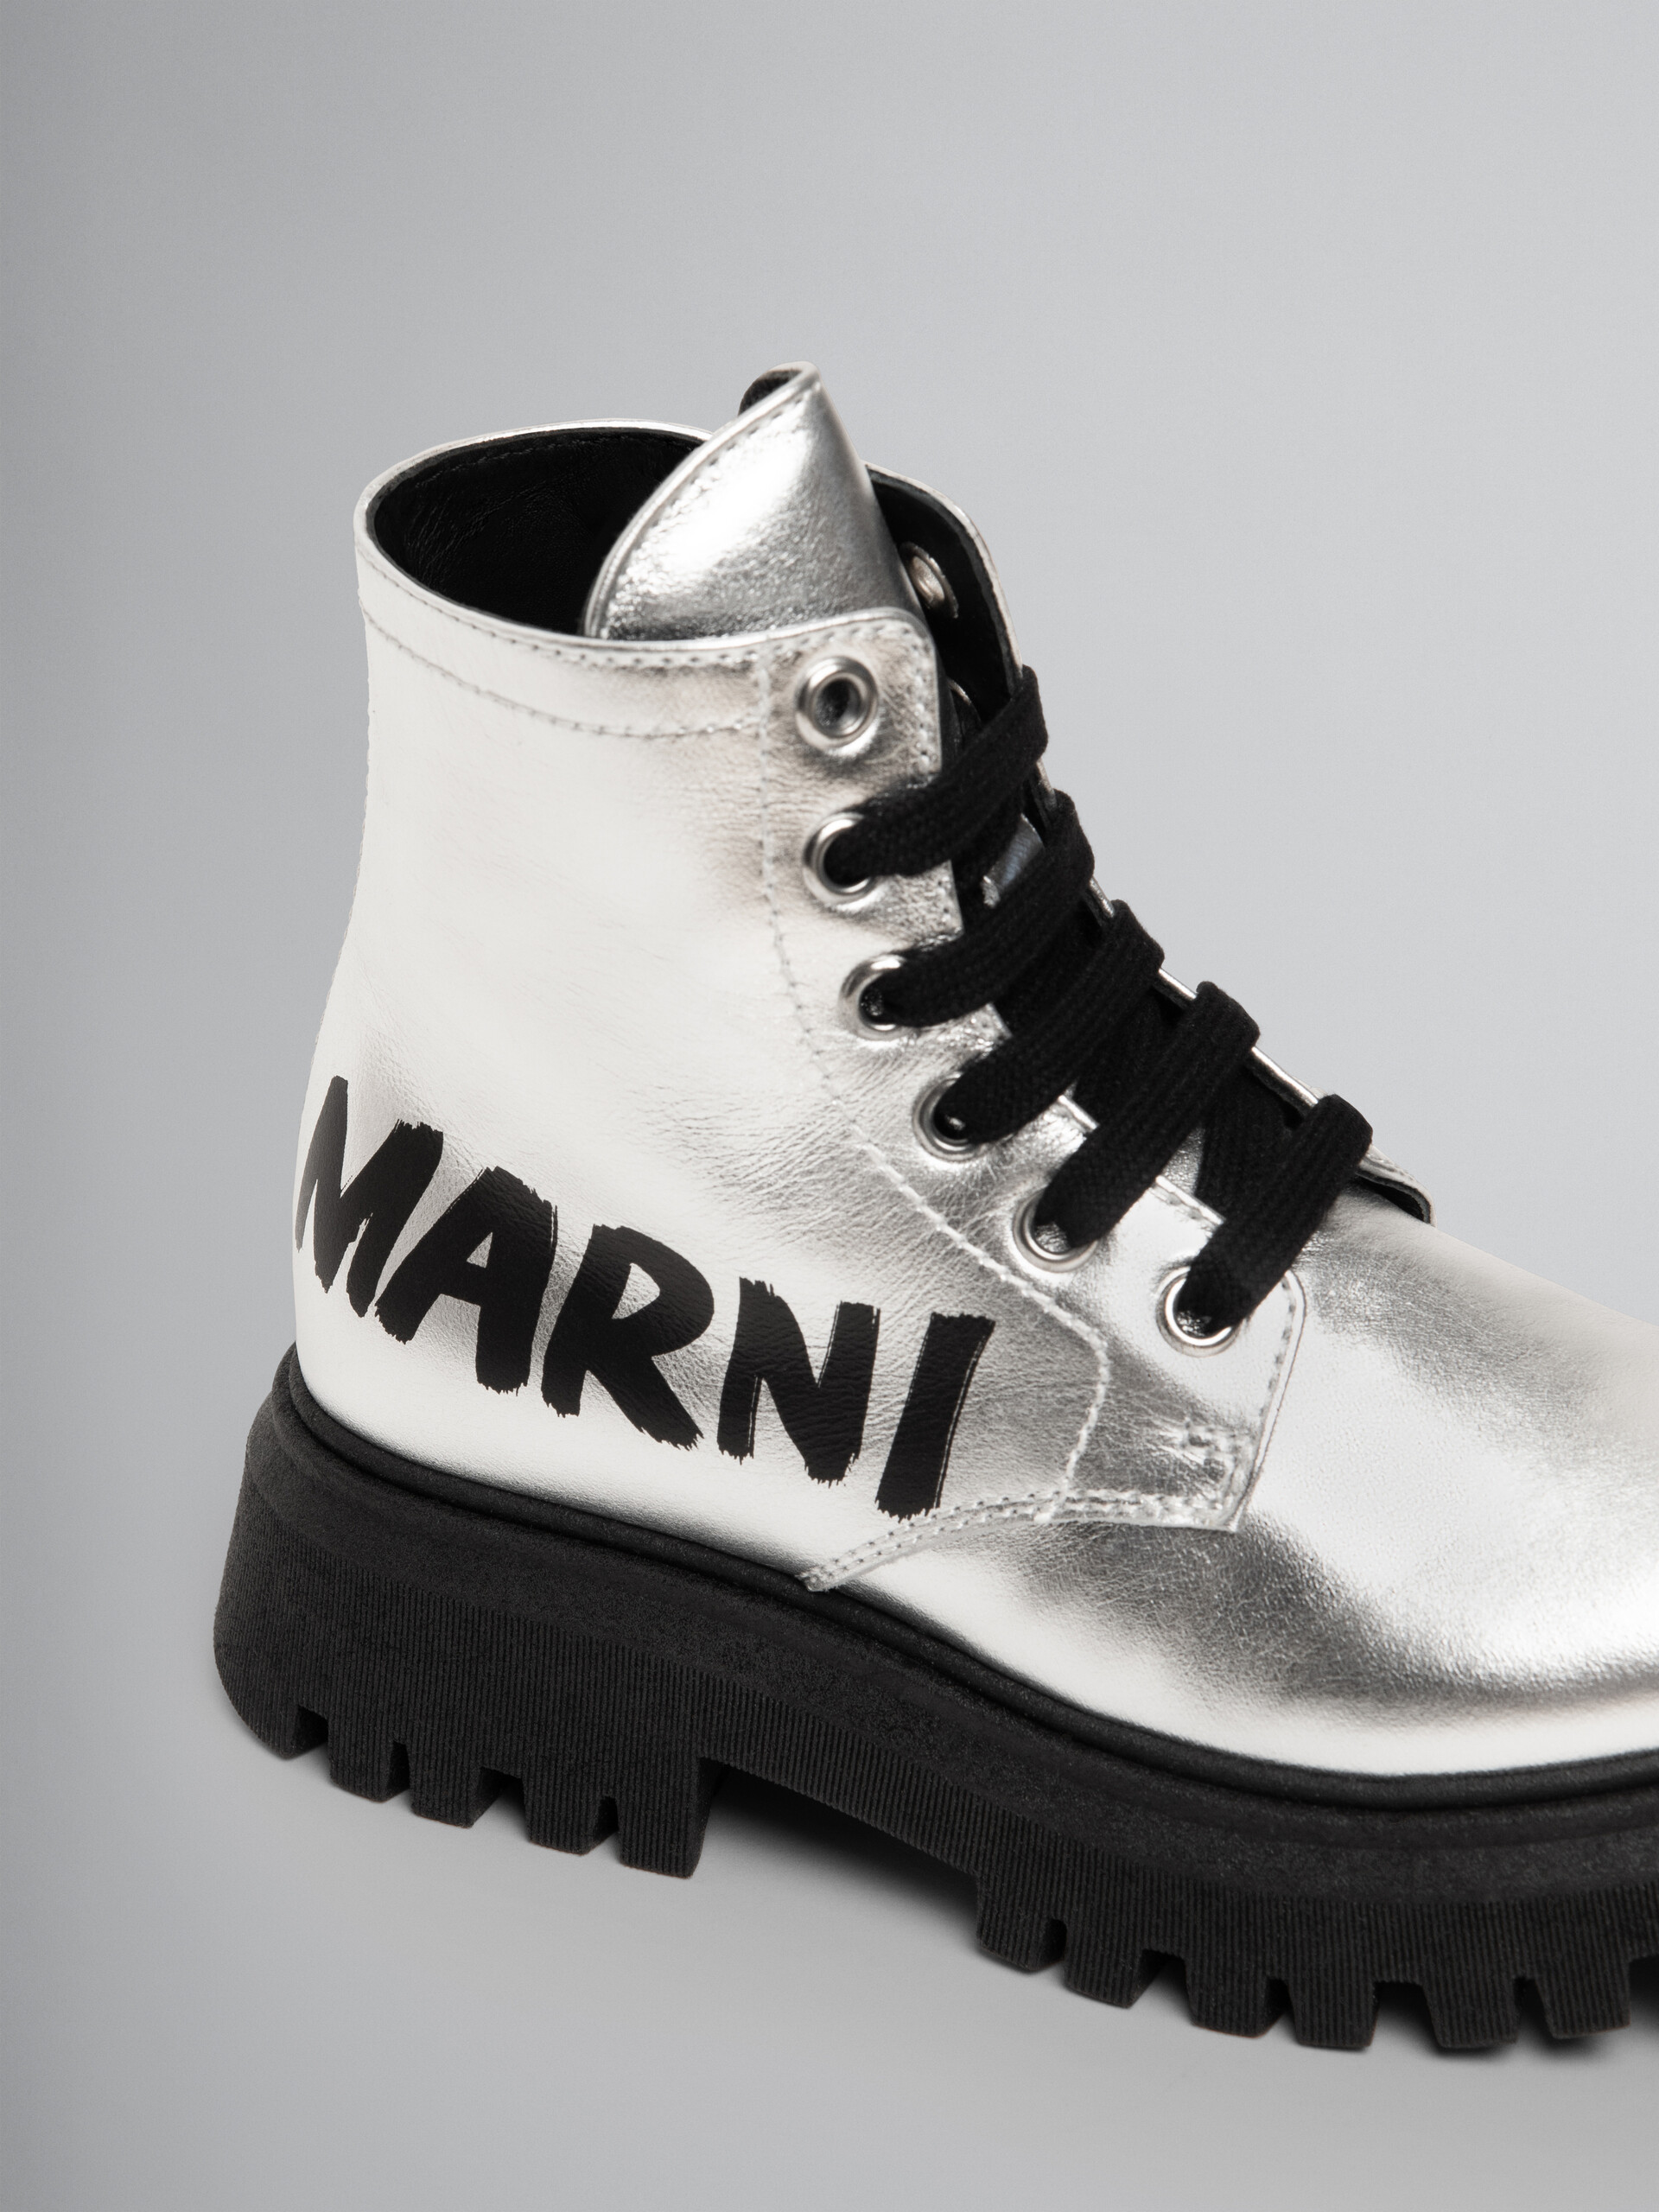 Silver leather combat boot with Brush logo - Other accessories - Image 4